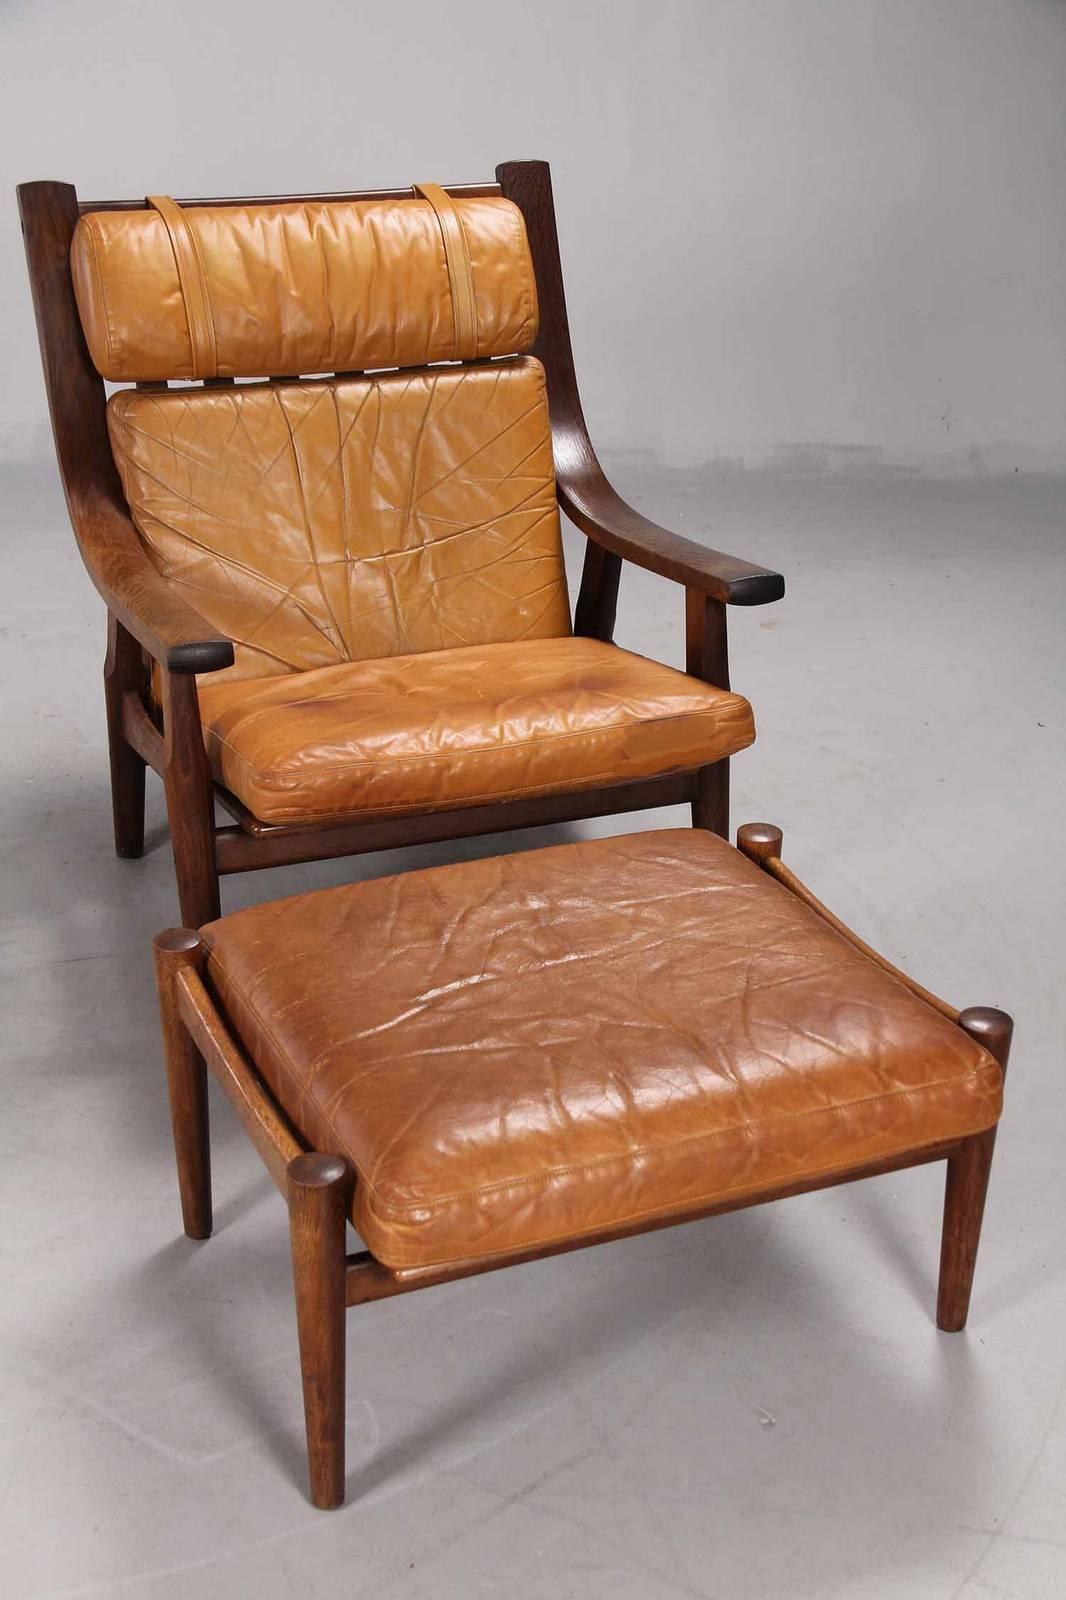 High-backed armchair and ottoman designed by Danish Designer Hans Wegner in 1973. The frame of dark-stained oak with spoke back, both the chair and ottoman upholstered in cognac-colored leather. The chairs produced by GETAMA, model GE-530.